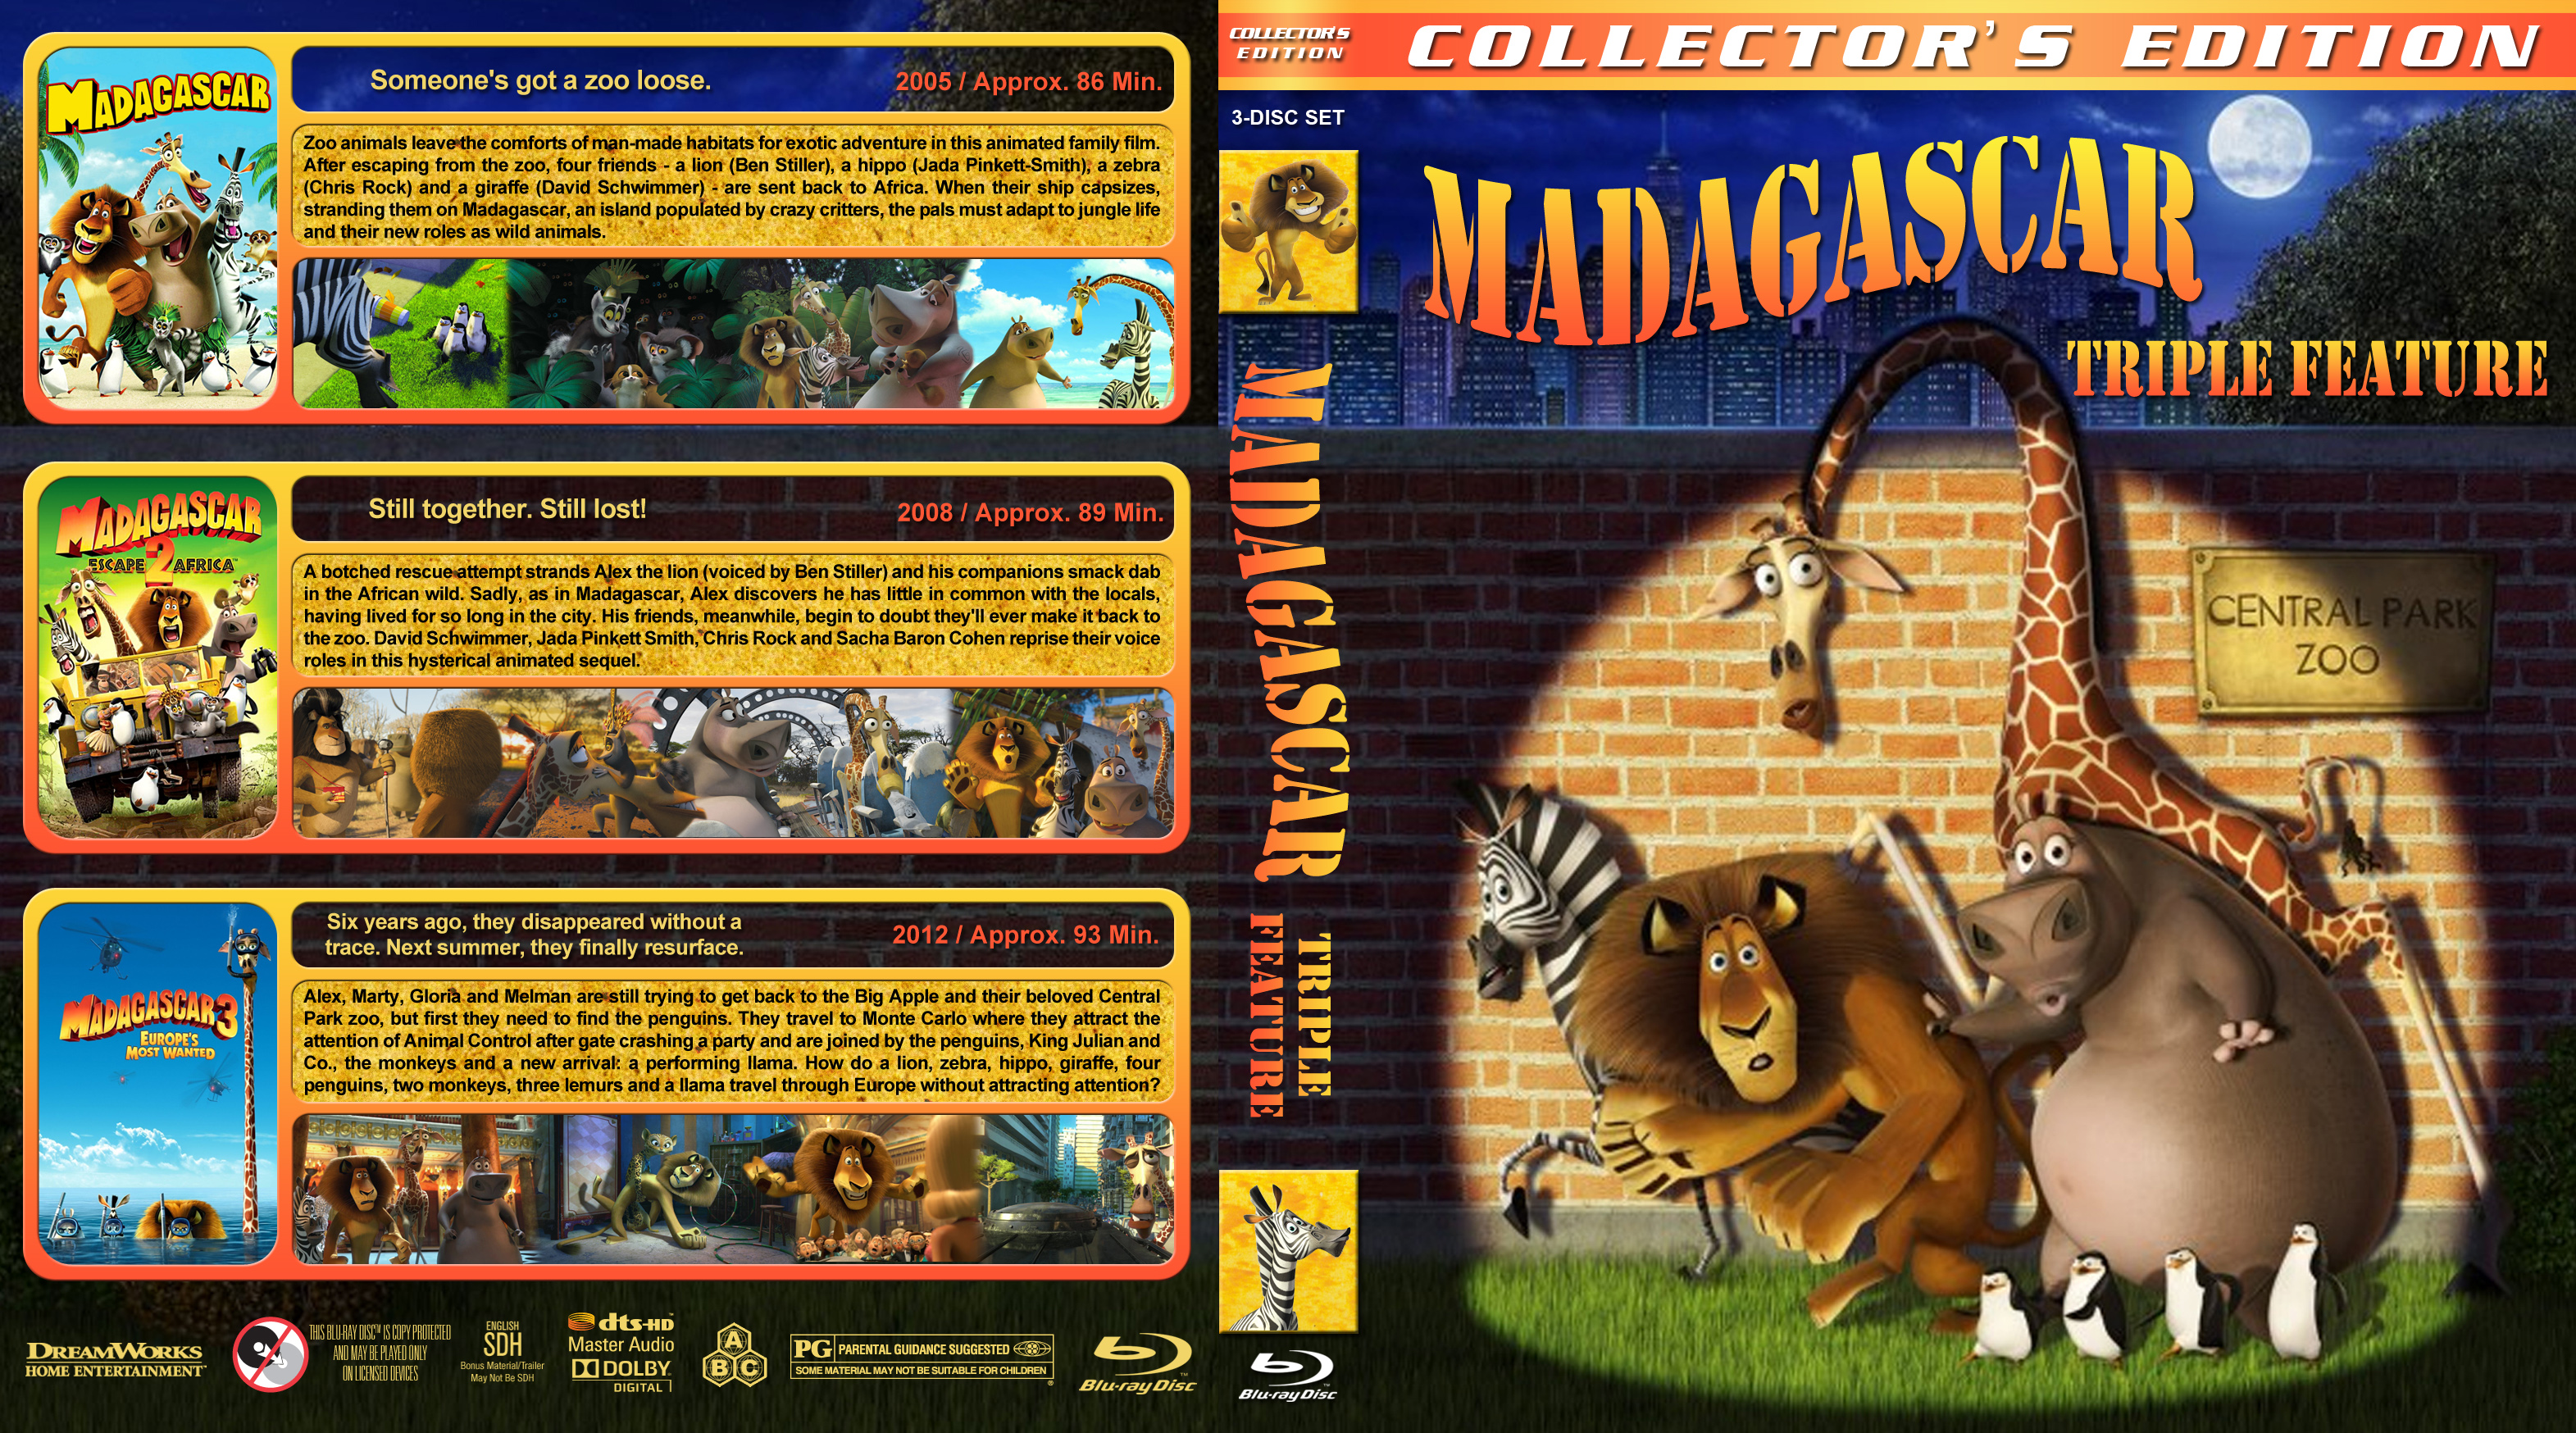 Madagascar Triple Br Dvd Covers Cover Century Over 500 000 Album Art Covers For Free